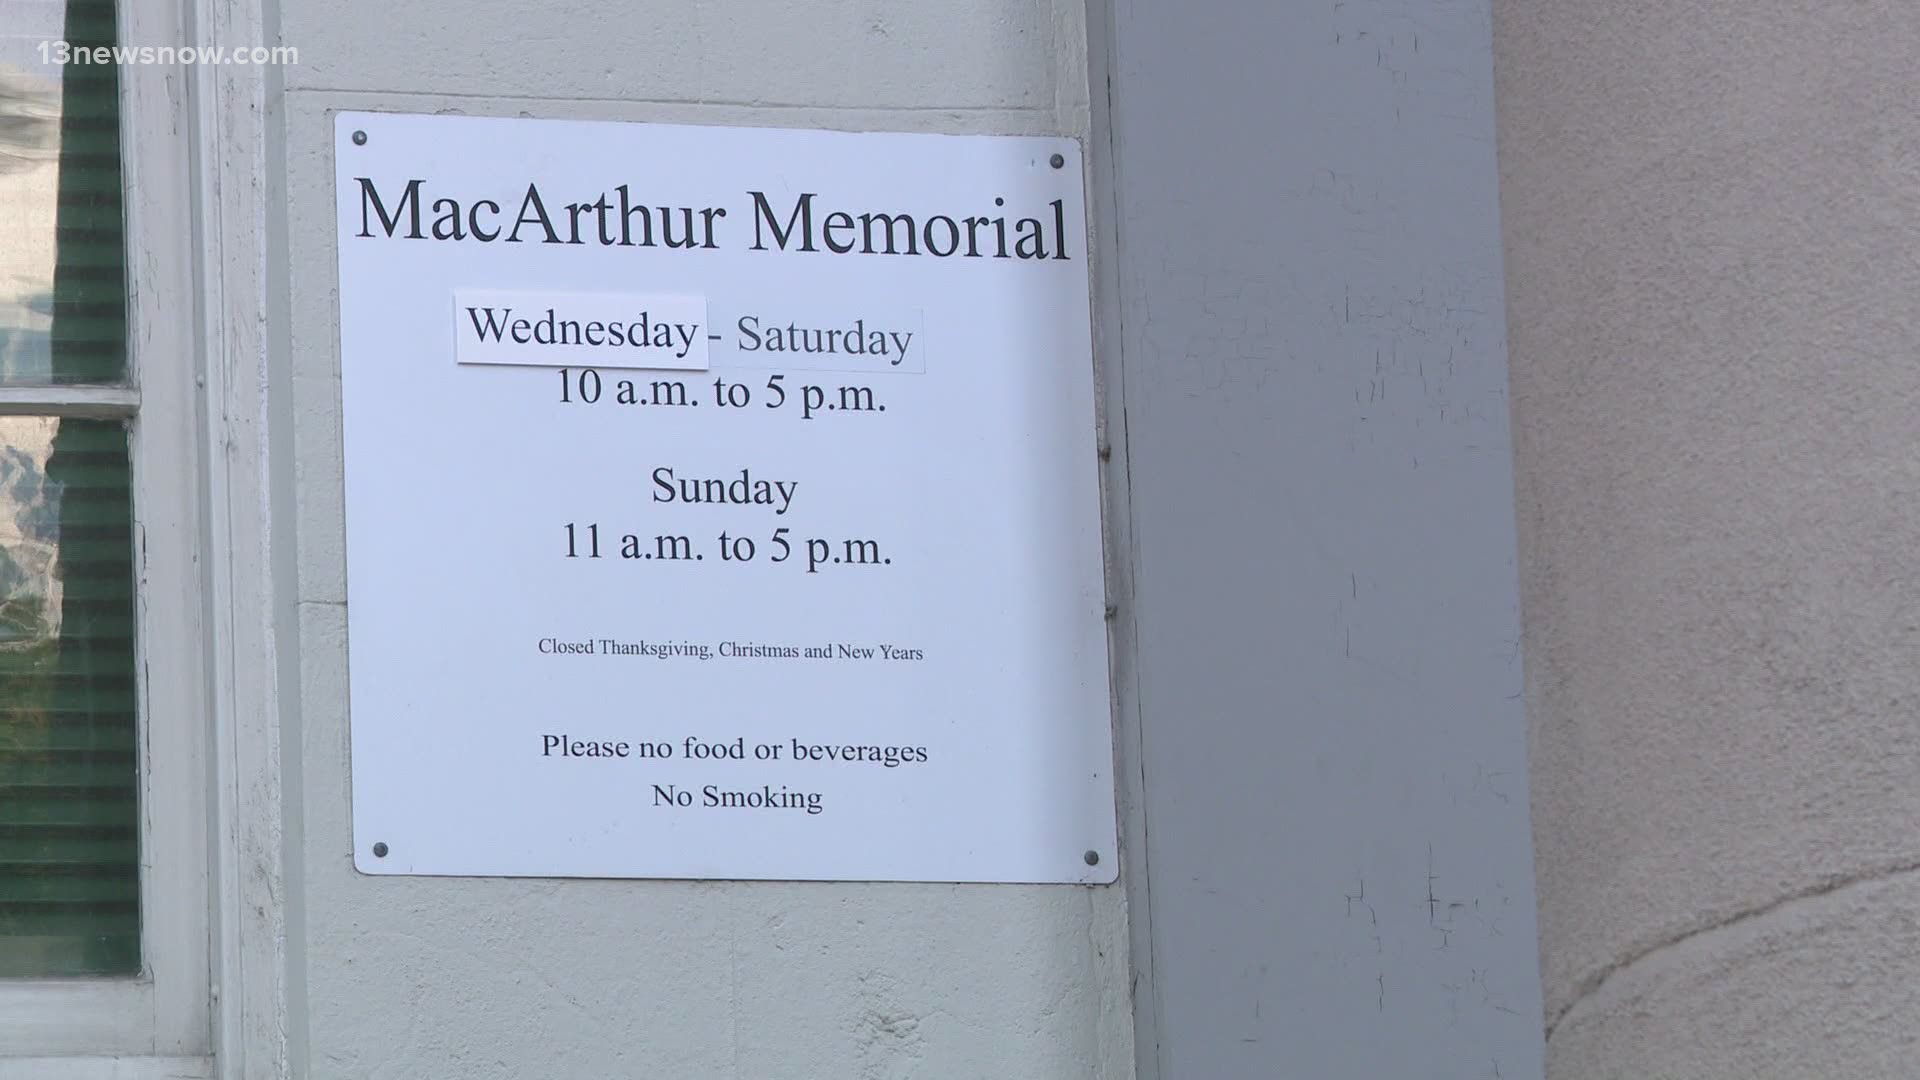 MacArthur Memorial is encouraging social distancing and requiring face masks.